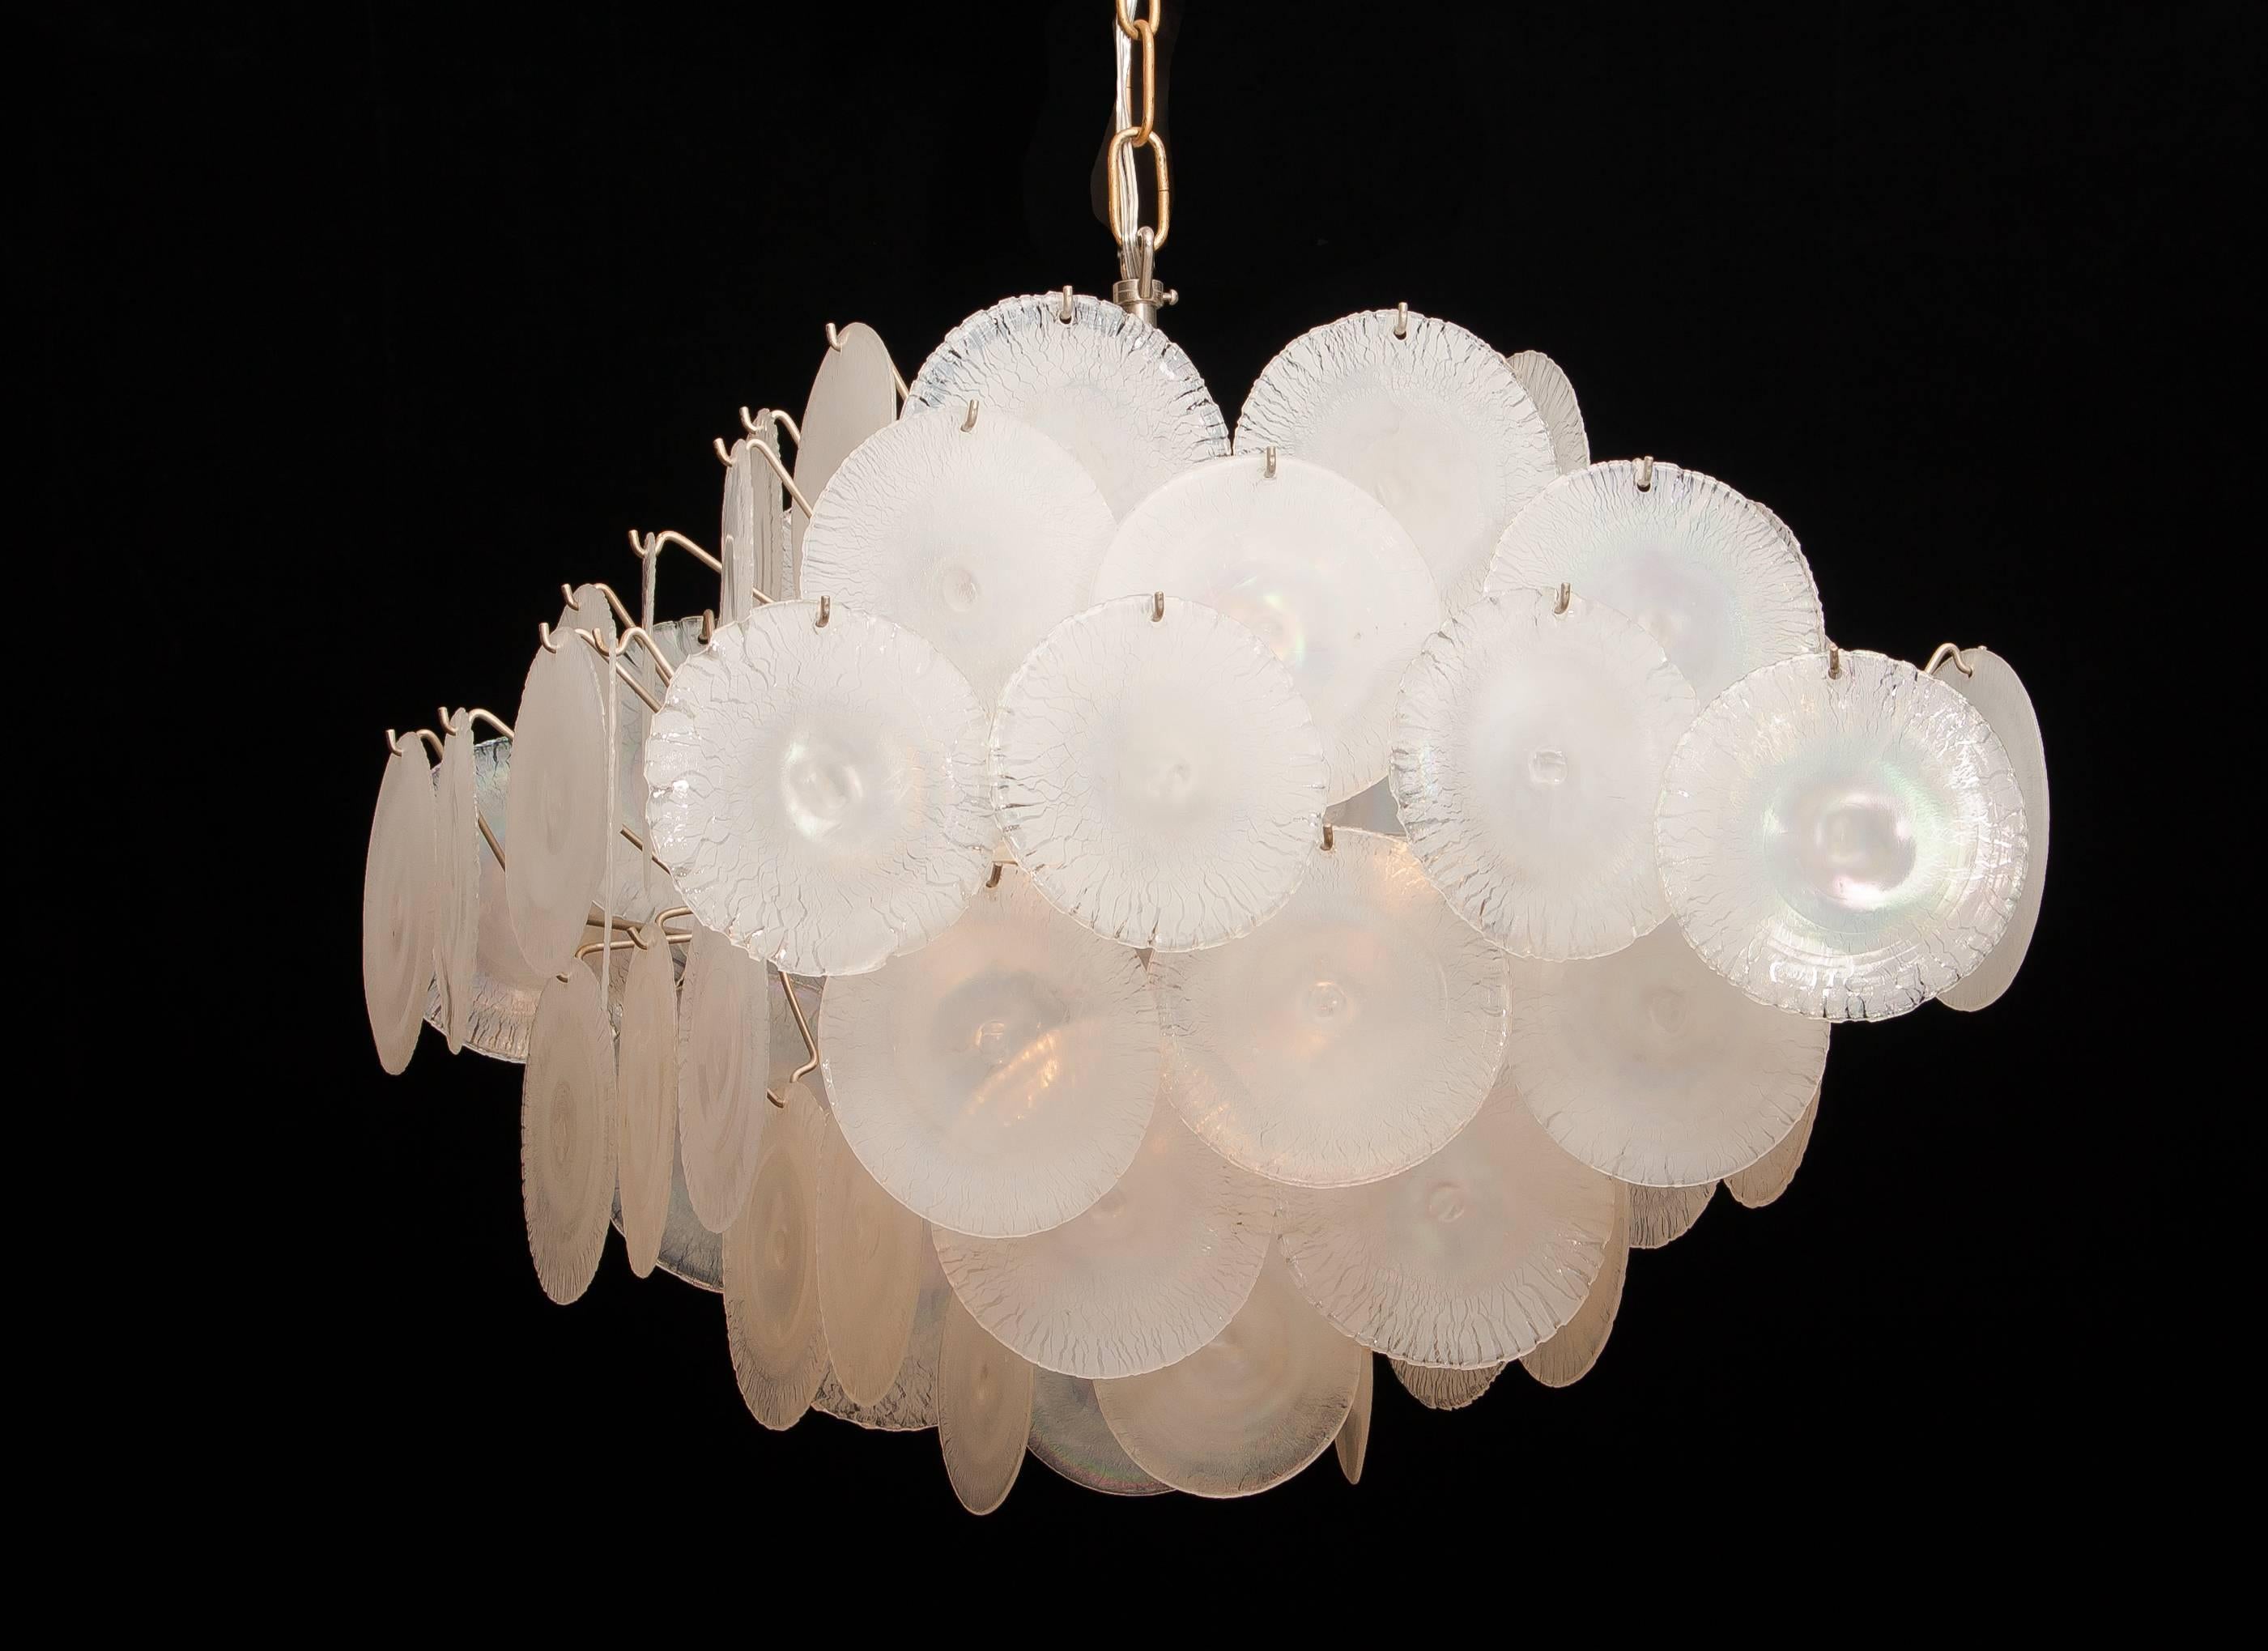 Extremely beautiful Gino Vistosi chandelier with white / pearl colored handmade Murano crystal discs. 

This Gino Vistosi chandelier is made in Italy in the 1960s. The chandelier contains 60 Murano white / pearl colored crystal discs. All in